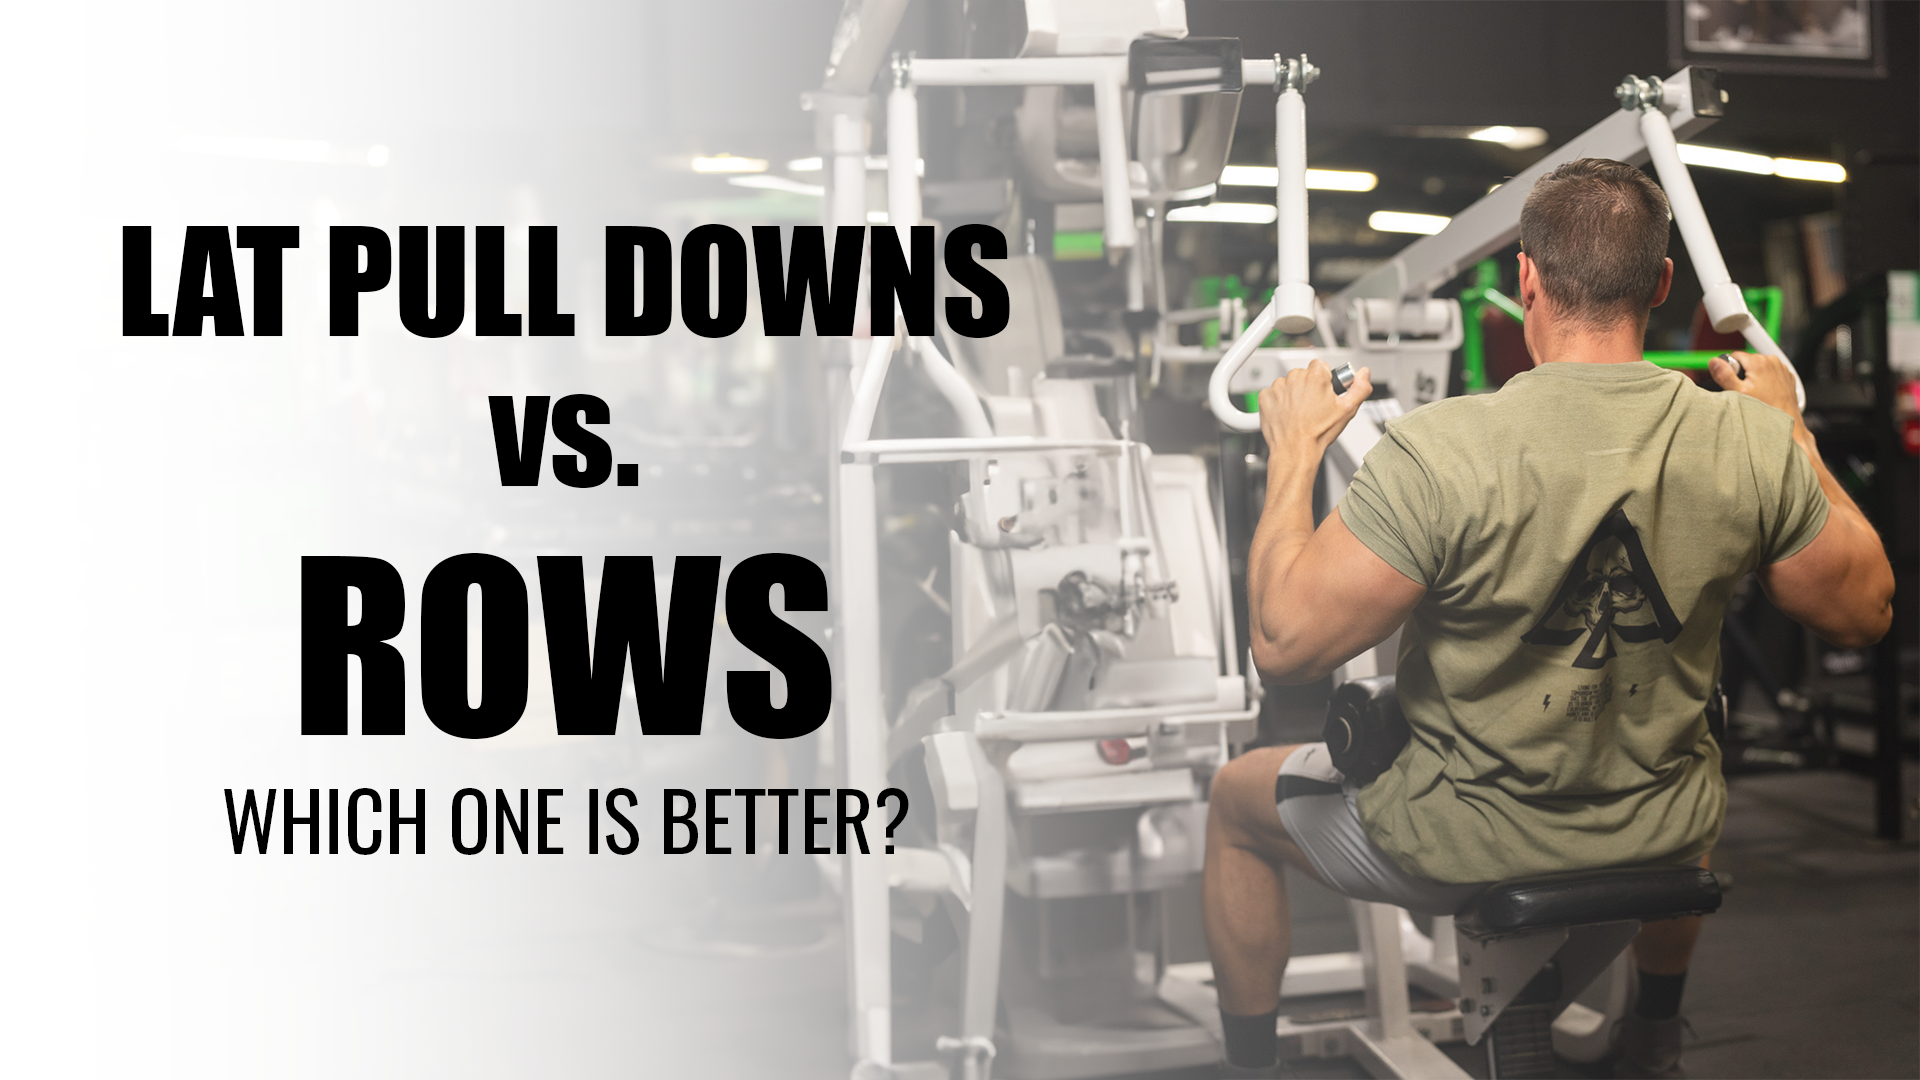 Which is Better: Lat Pull-Downs or Rows?